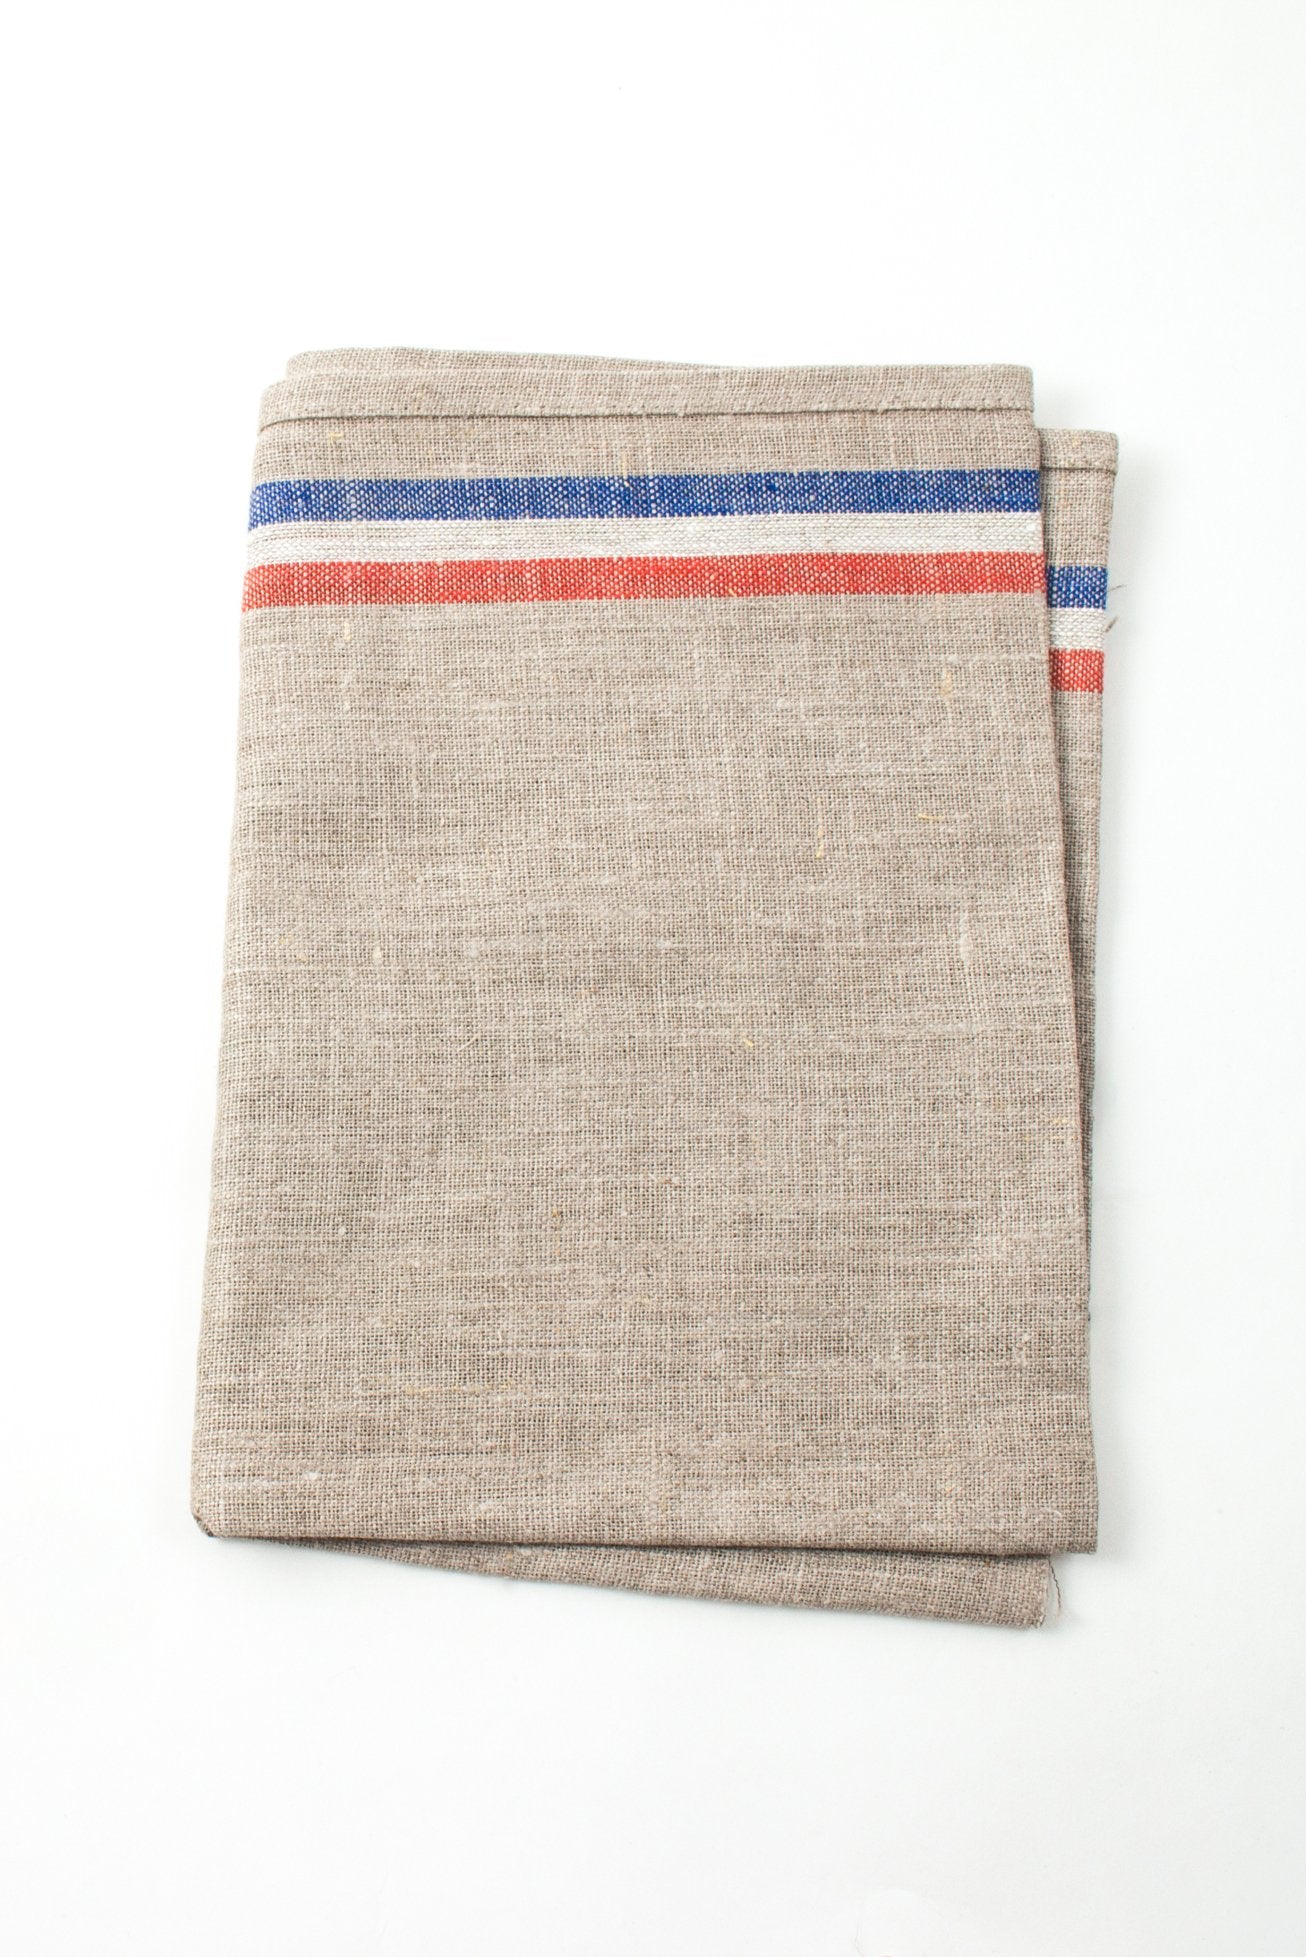 Thieffry Set of 2 French Flag Dish Towels (22" x 32") - French Dry Goods